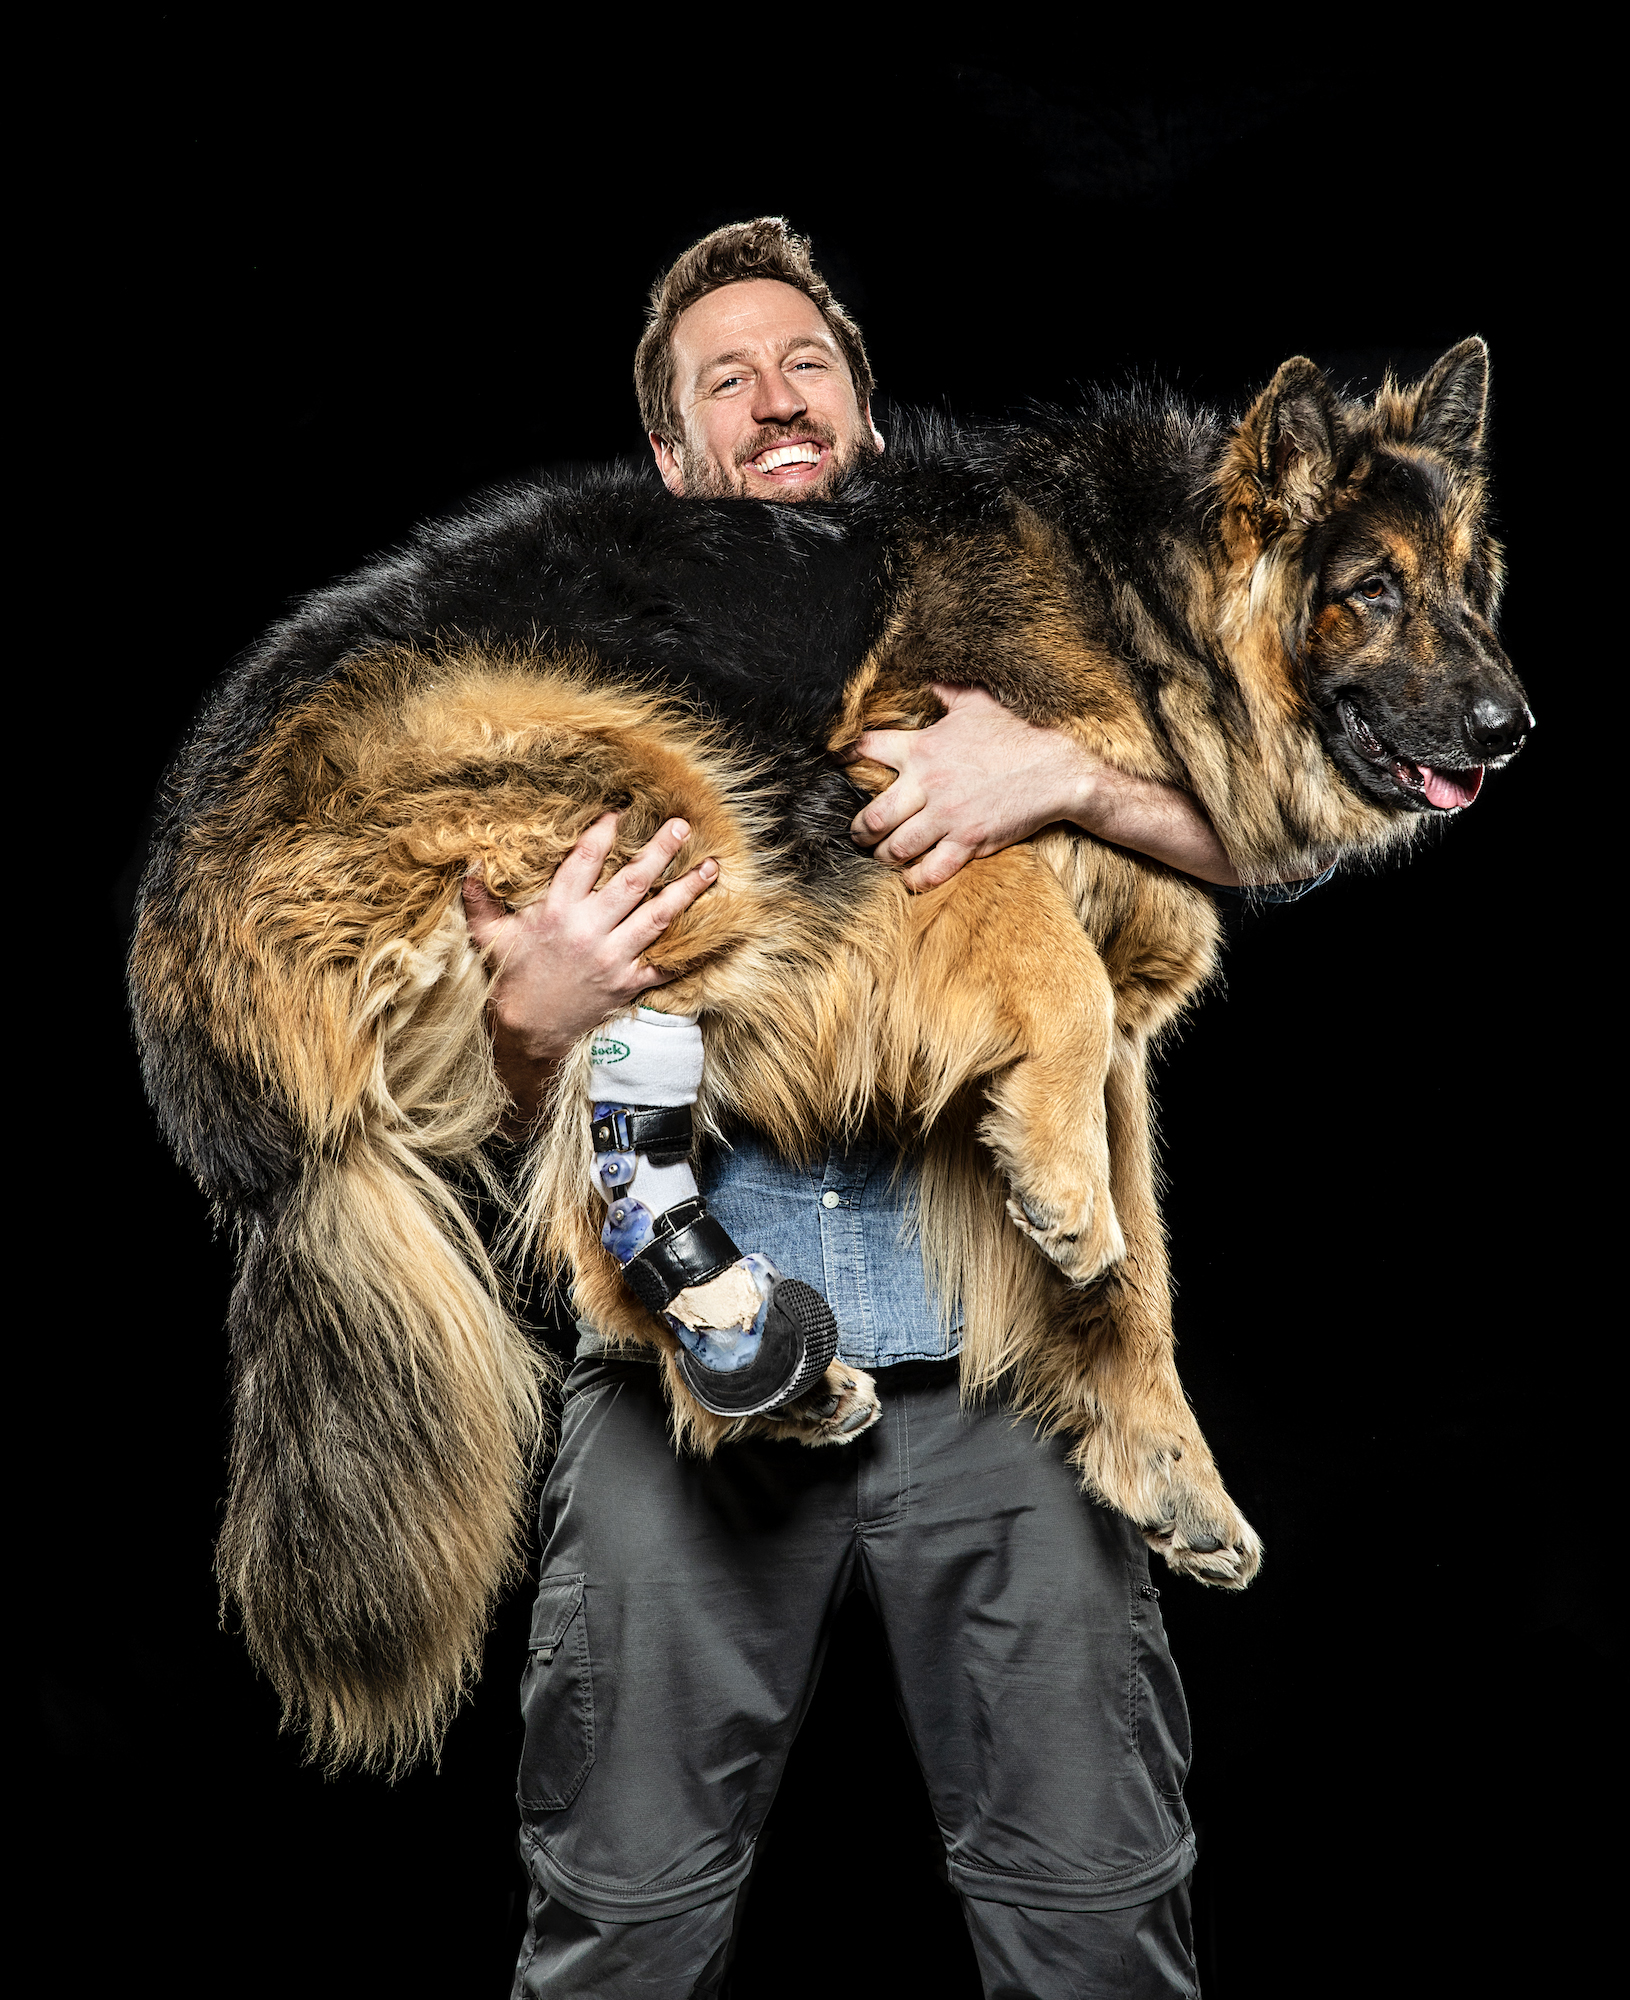 Derrick Campana holding Petey, a kind shepherd who was born with one foot missing, photo by Steve Boyle